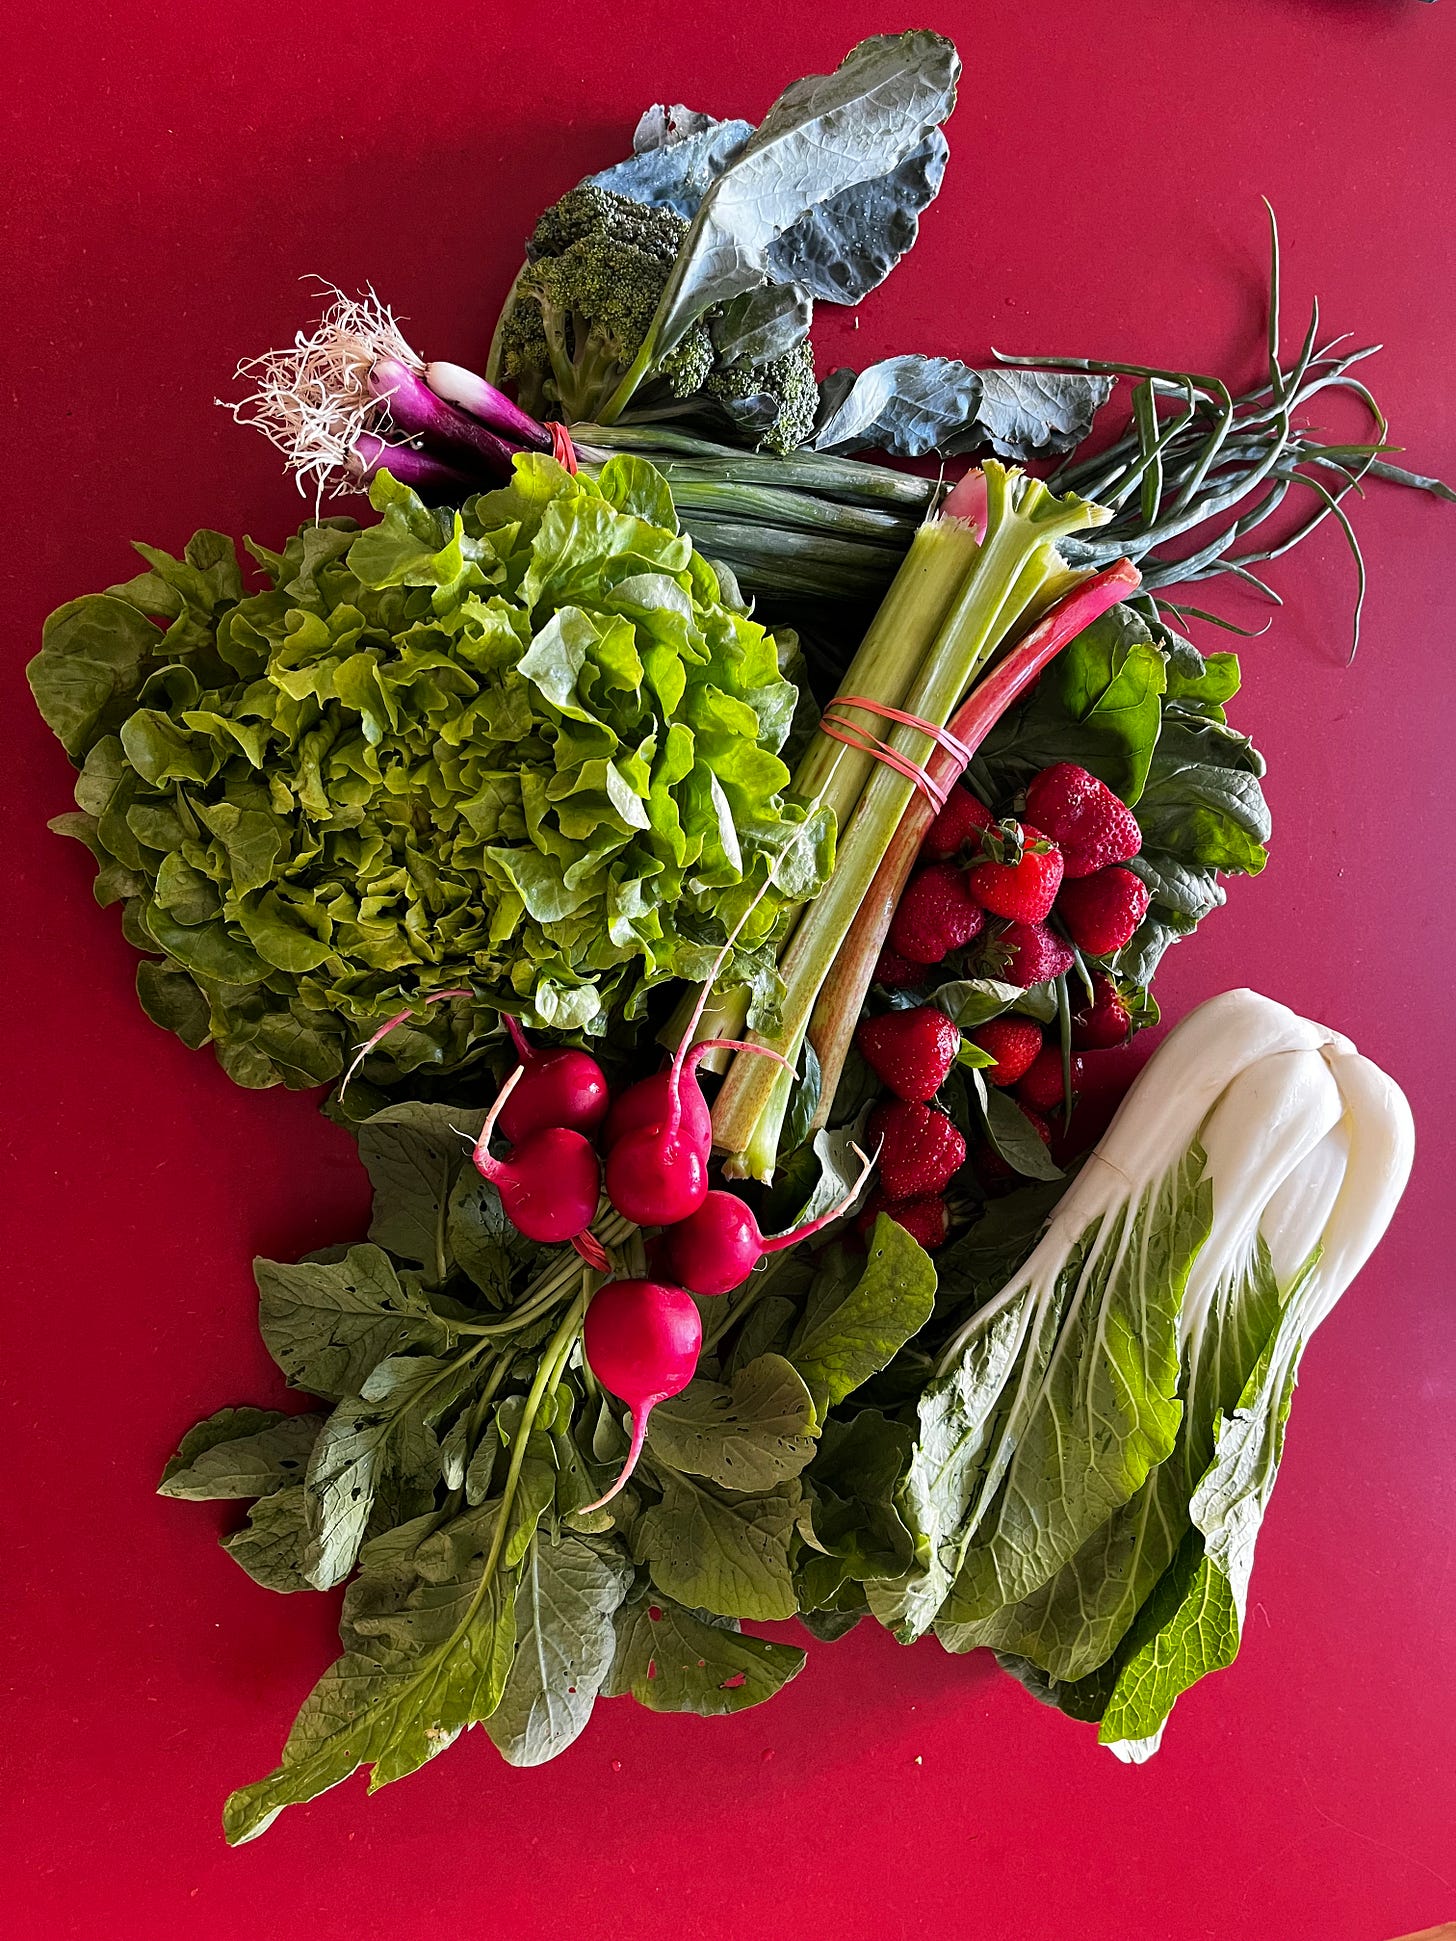 Rhubarb, strawberries, bok choy, lettuce, and scallions on a backdrop of red